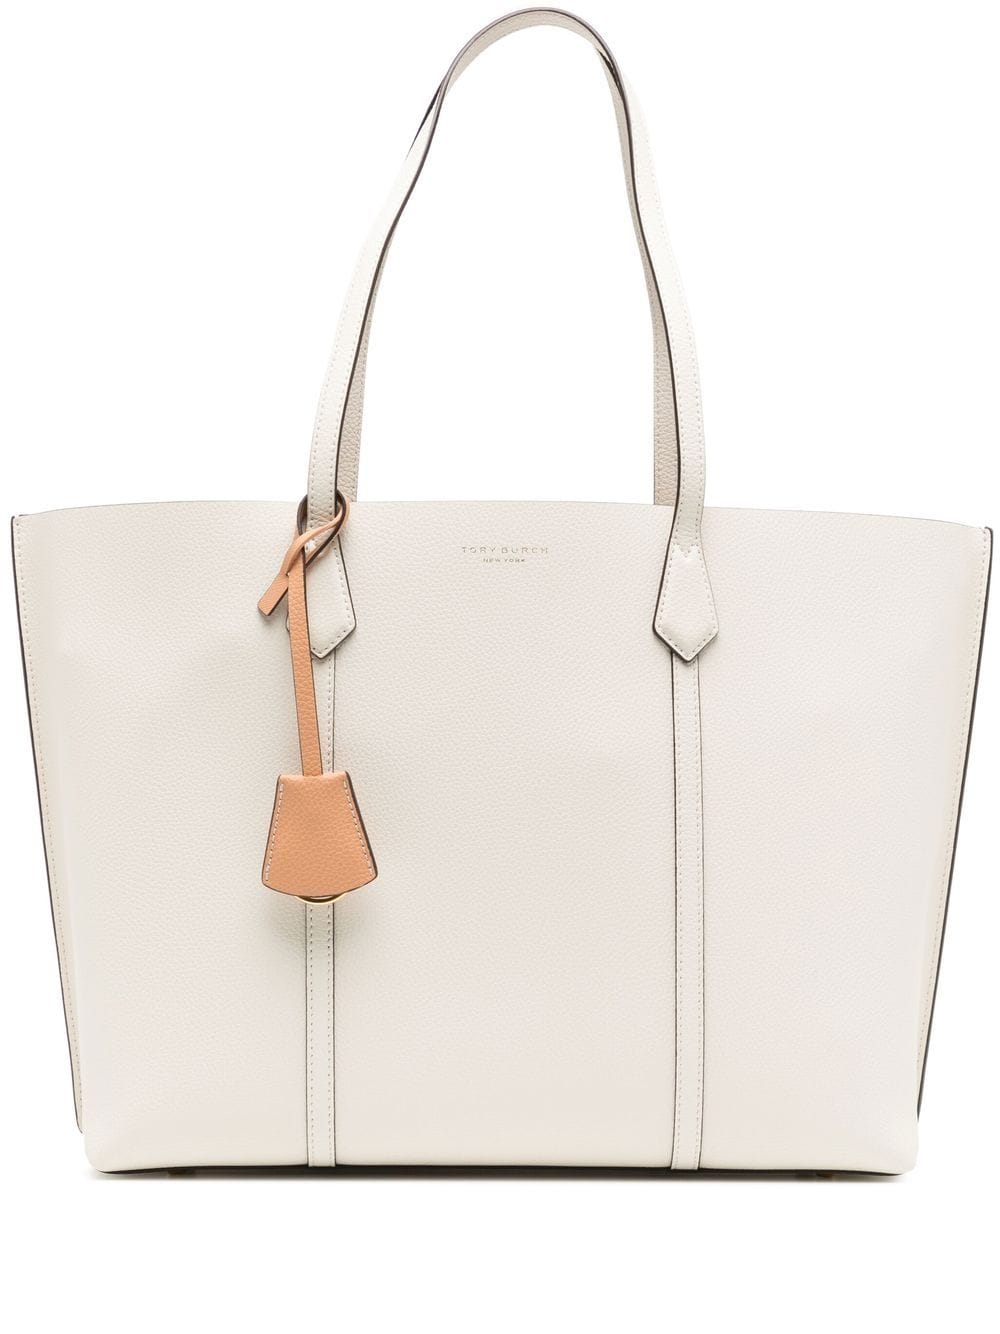 TORY BURCH GRAINED LEATHER TOTE